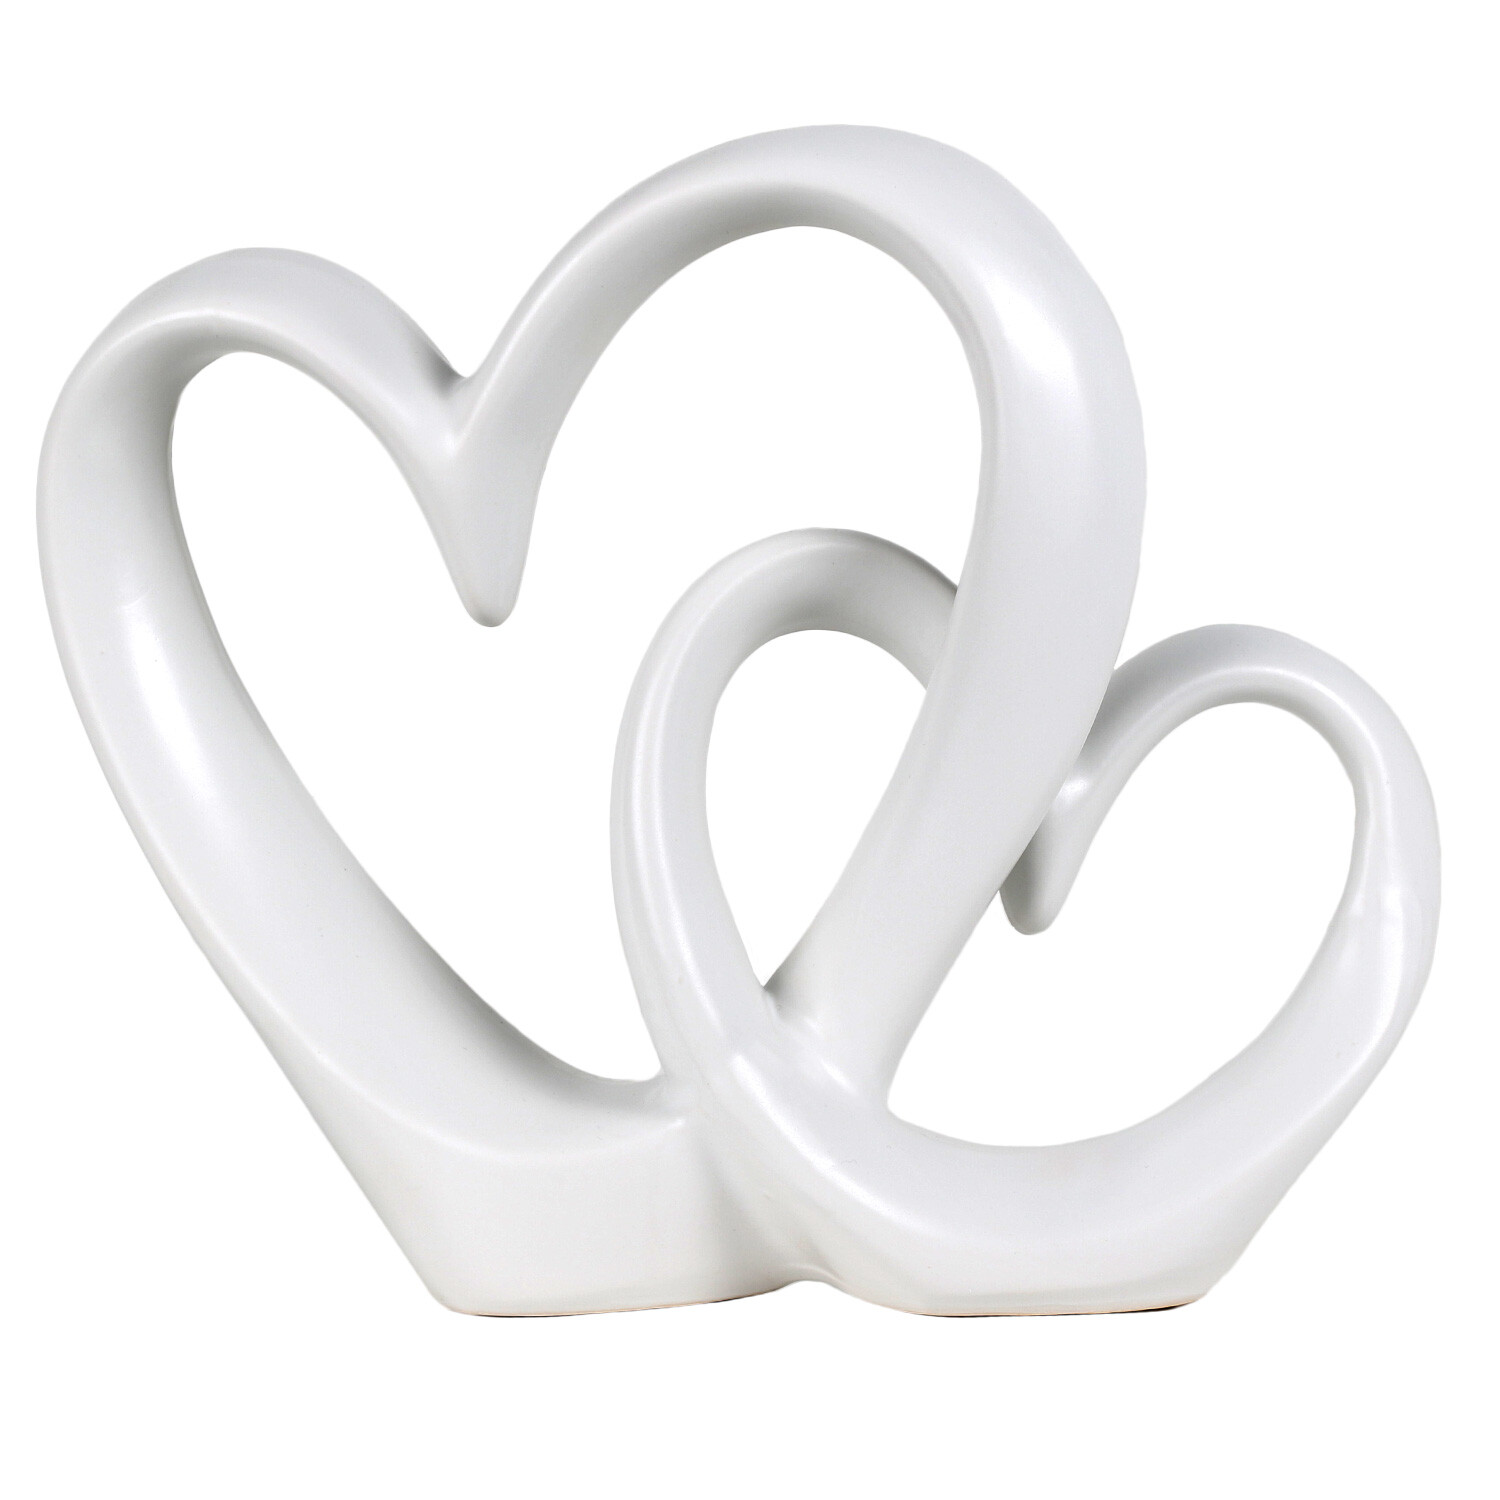 Single Black or White Double Heart Ornament in Assorted styles Image 4